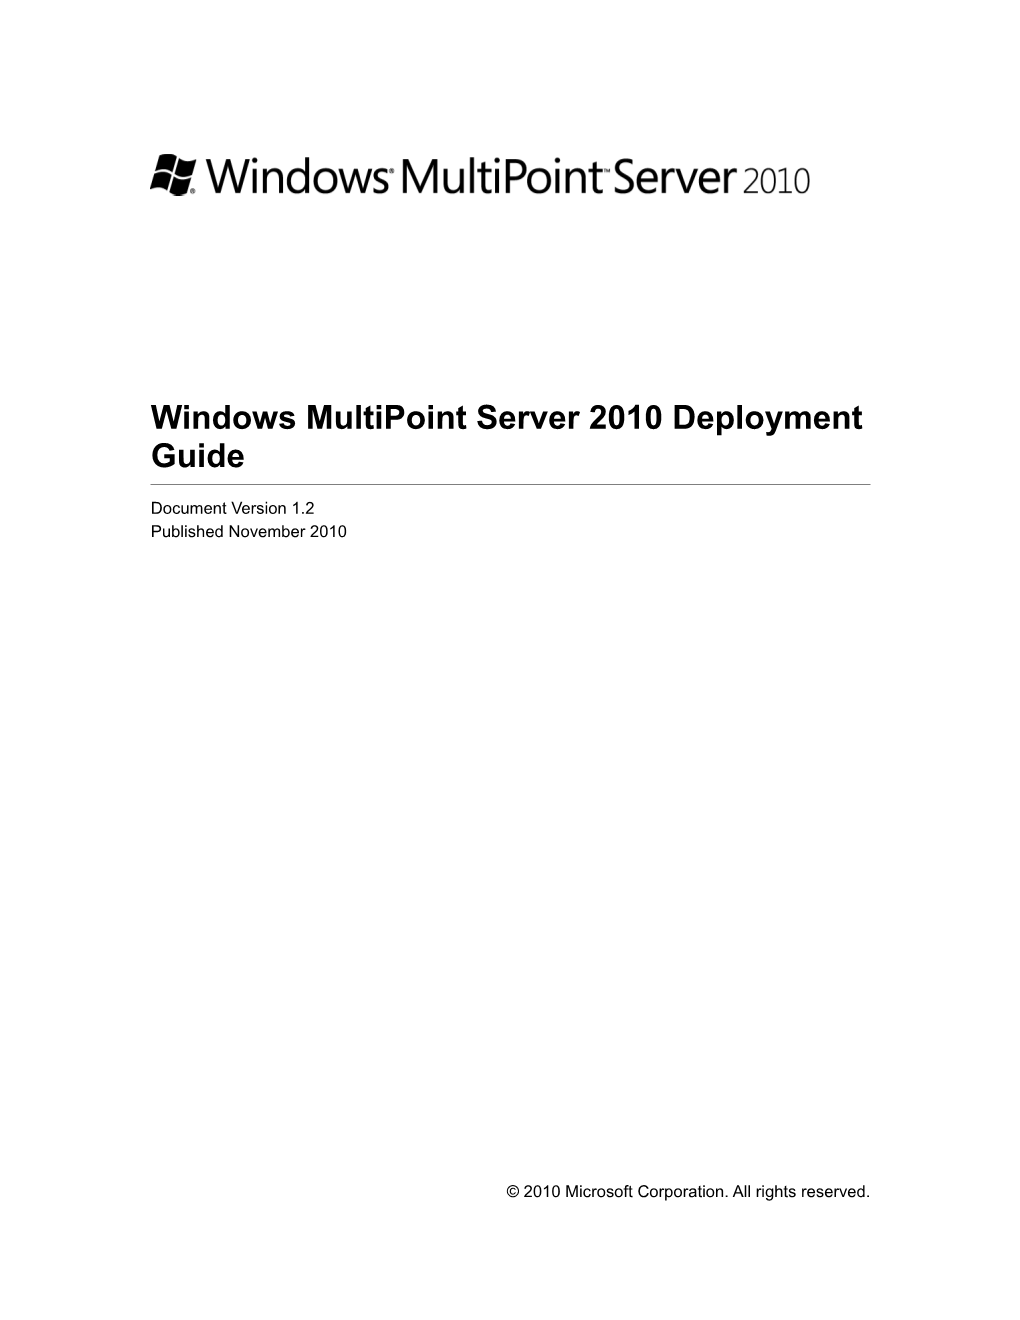 Windows Multipoint Server 2010 Deployment Guide